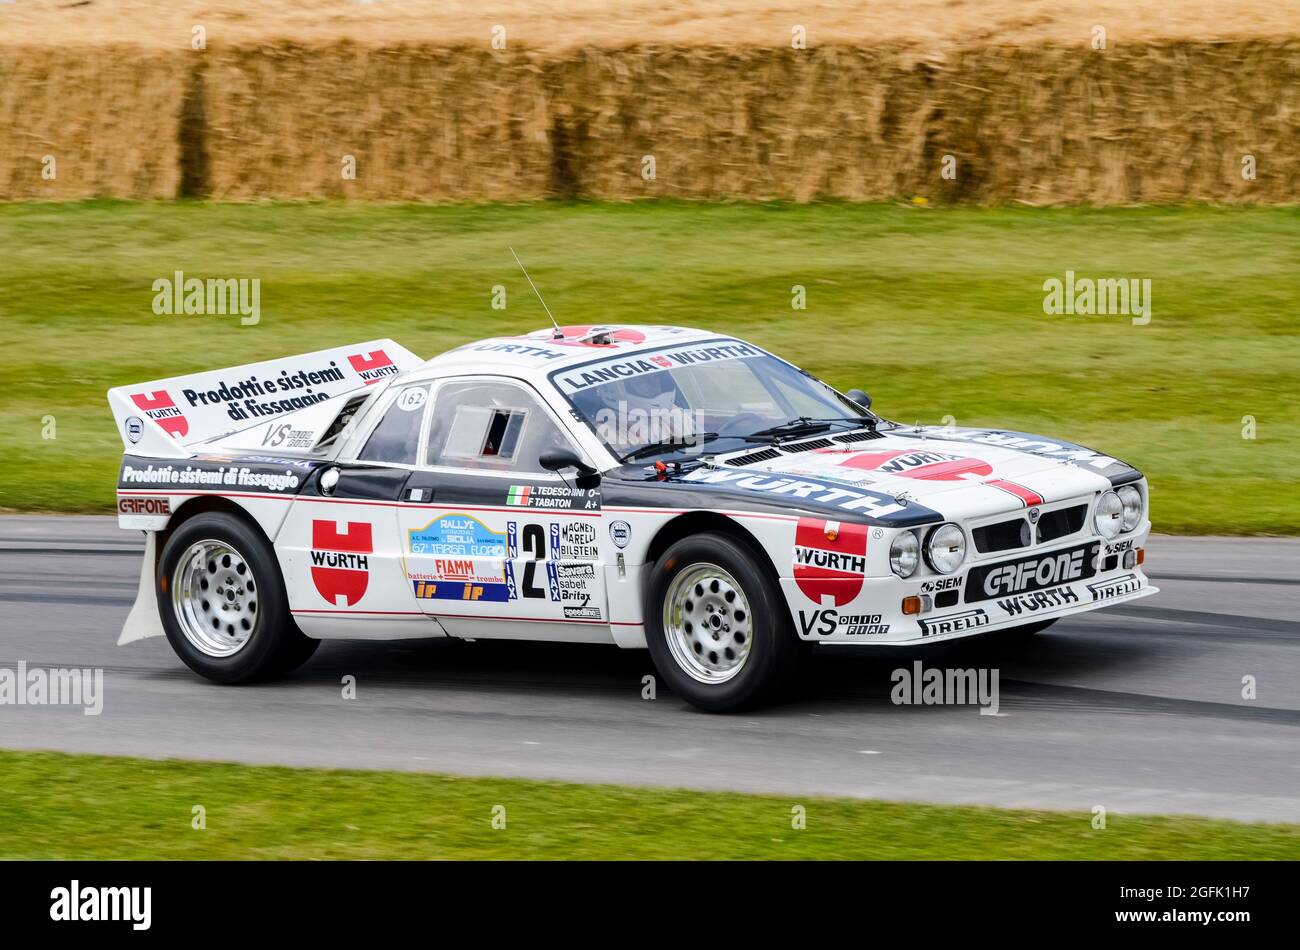 Lancia Rally 037 Group B rally car racing up the hill climb at the Goodwood Festival of Speed 2014. Motor racing event. Stock Photo